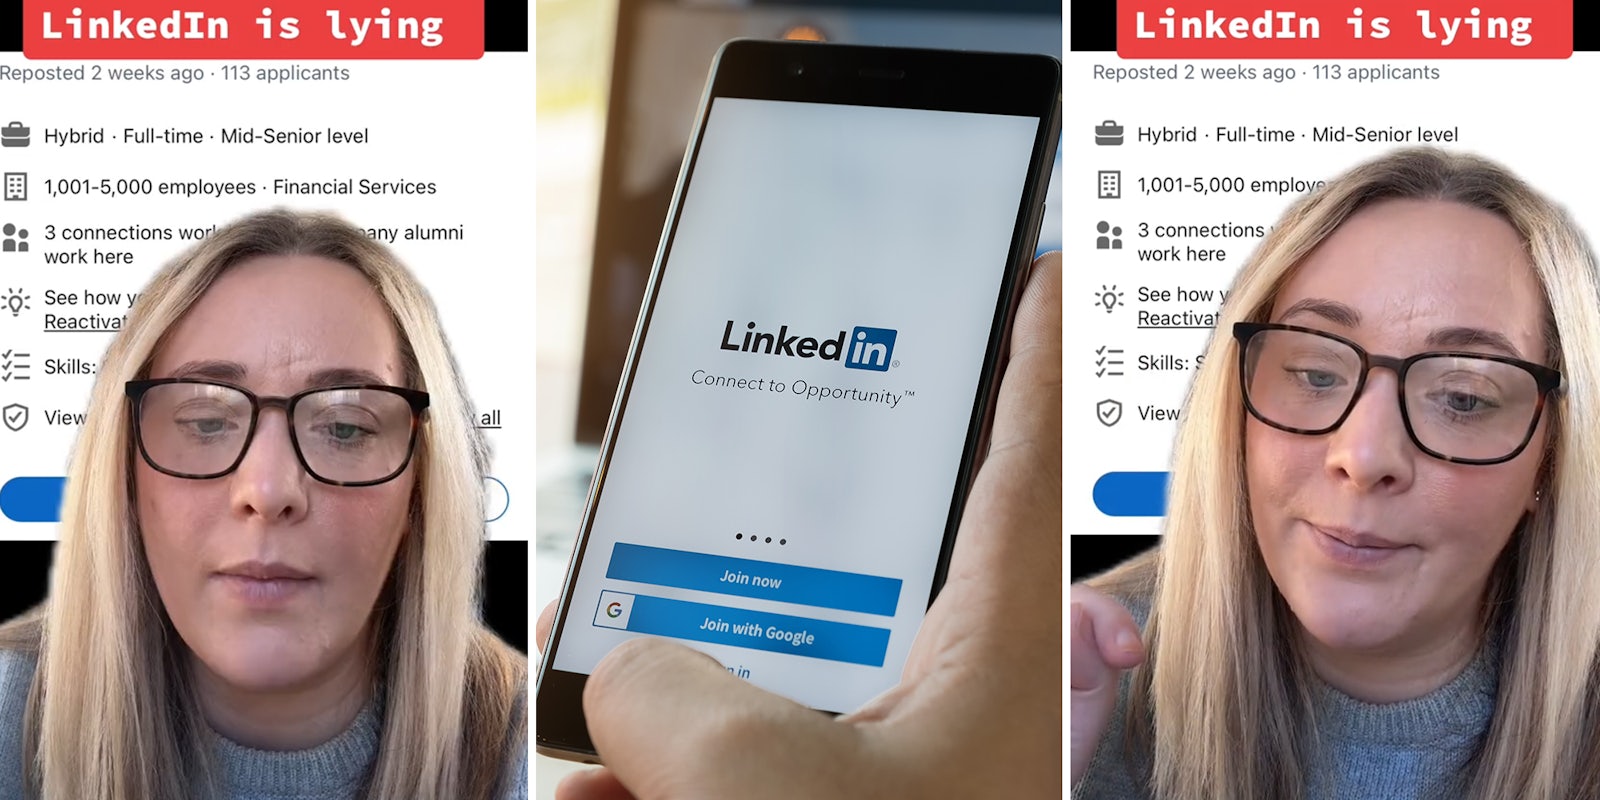 Recruiter says LinkedIn is ‘lying’ about the number of applicants on job postings